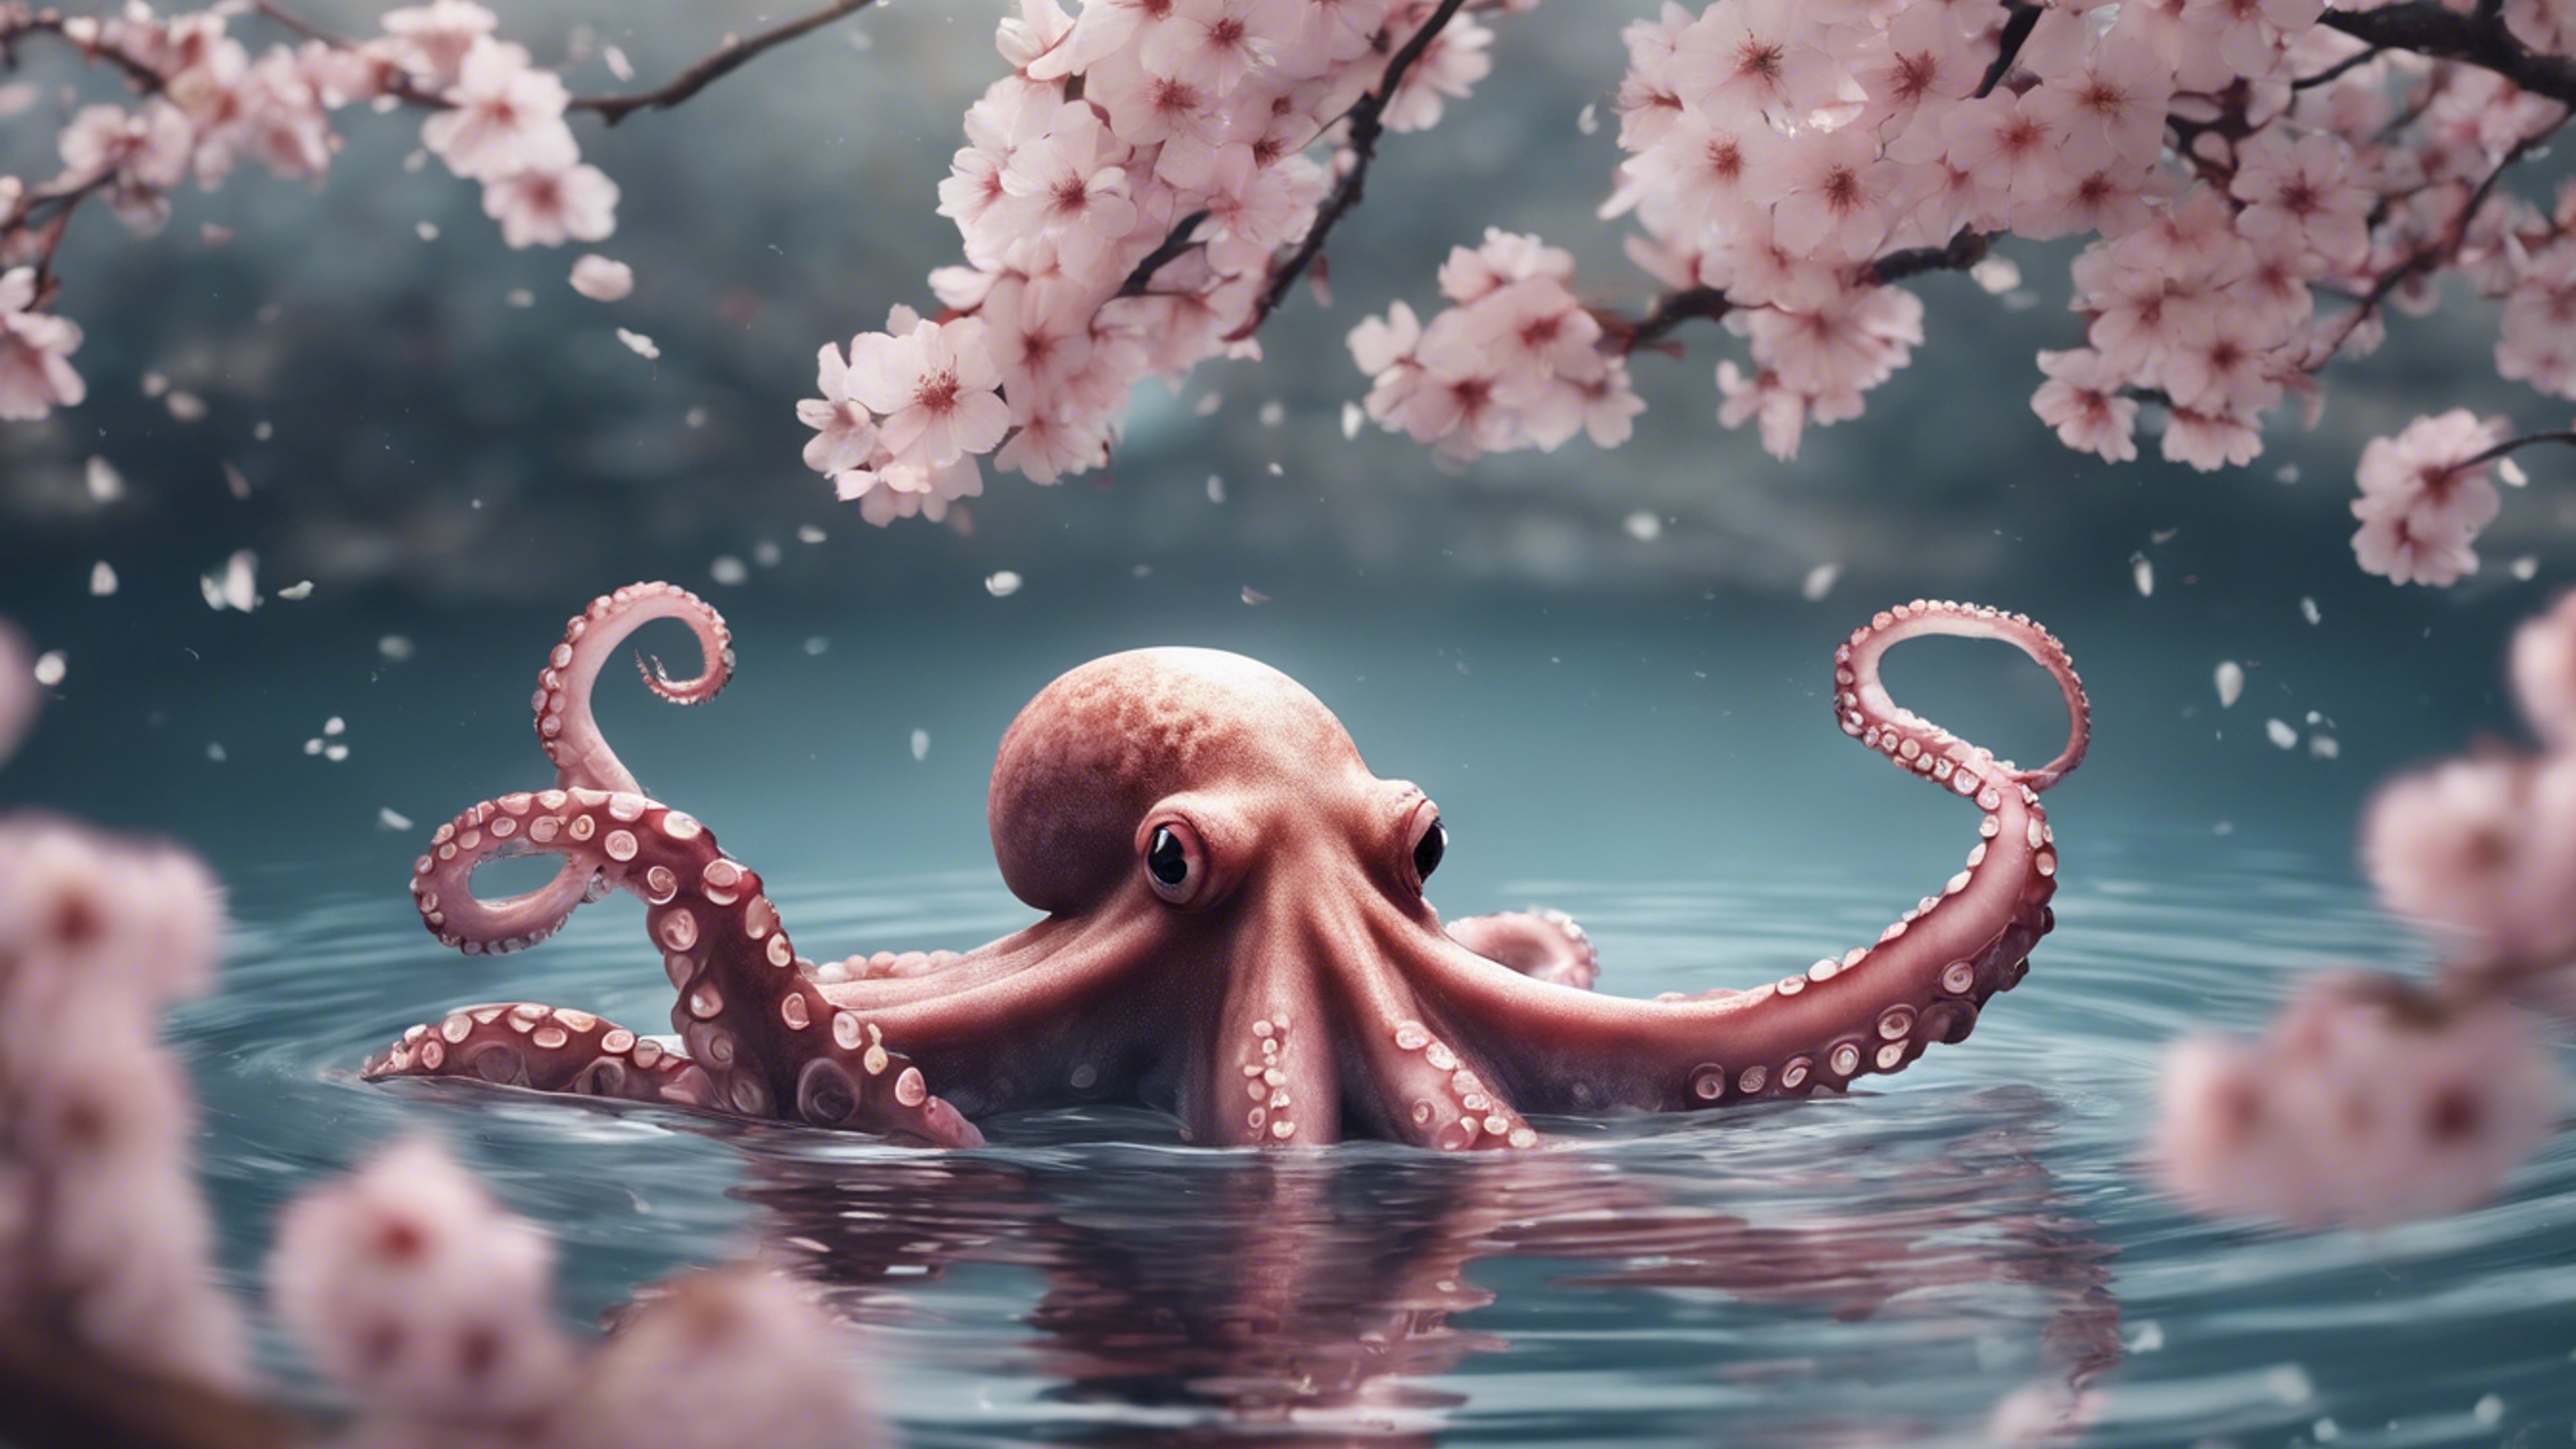 A sketch of an octopus floating peacefully in the water, with Japanese cherry blossoms gracefully falling around. Sfondo[a4f14d80ca6f4b538d98]